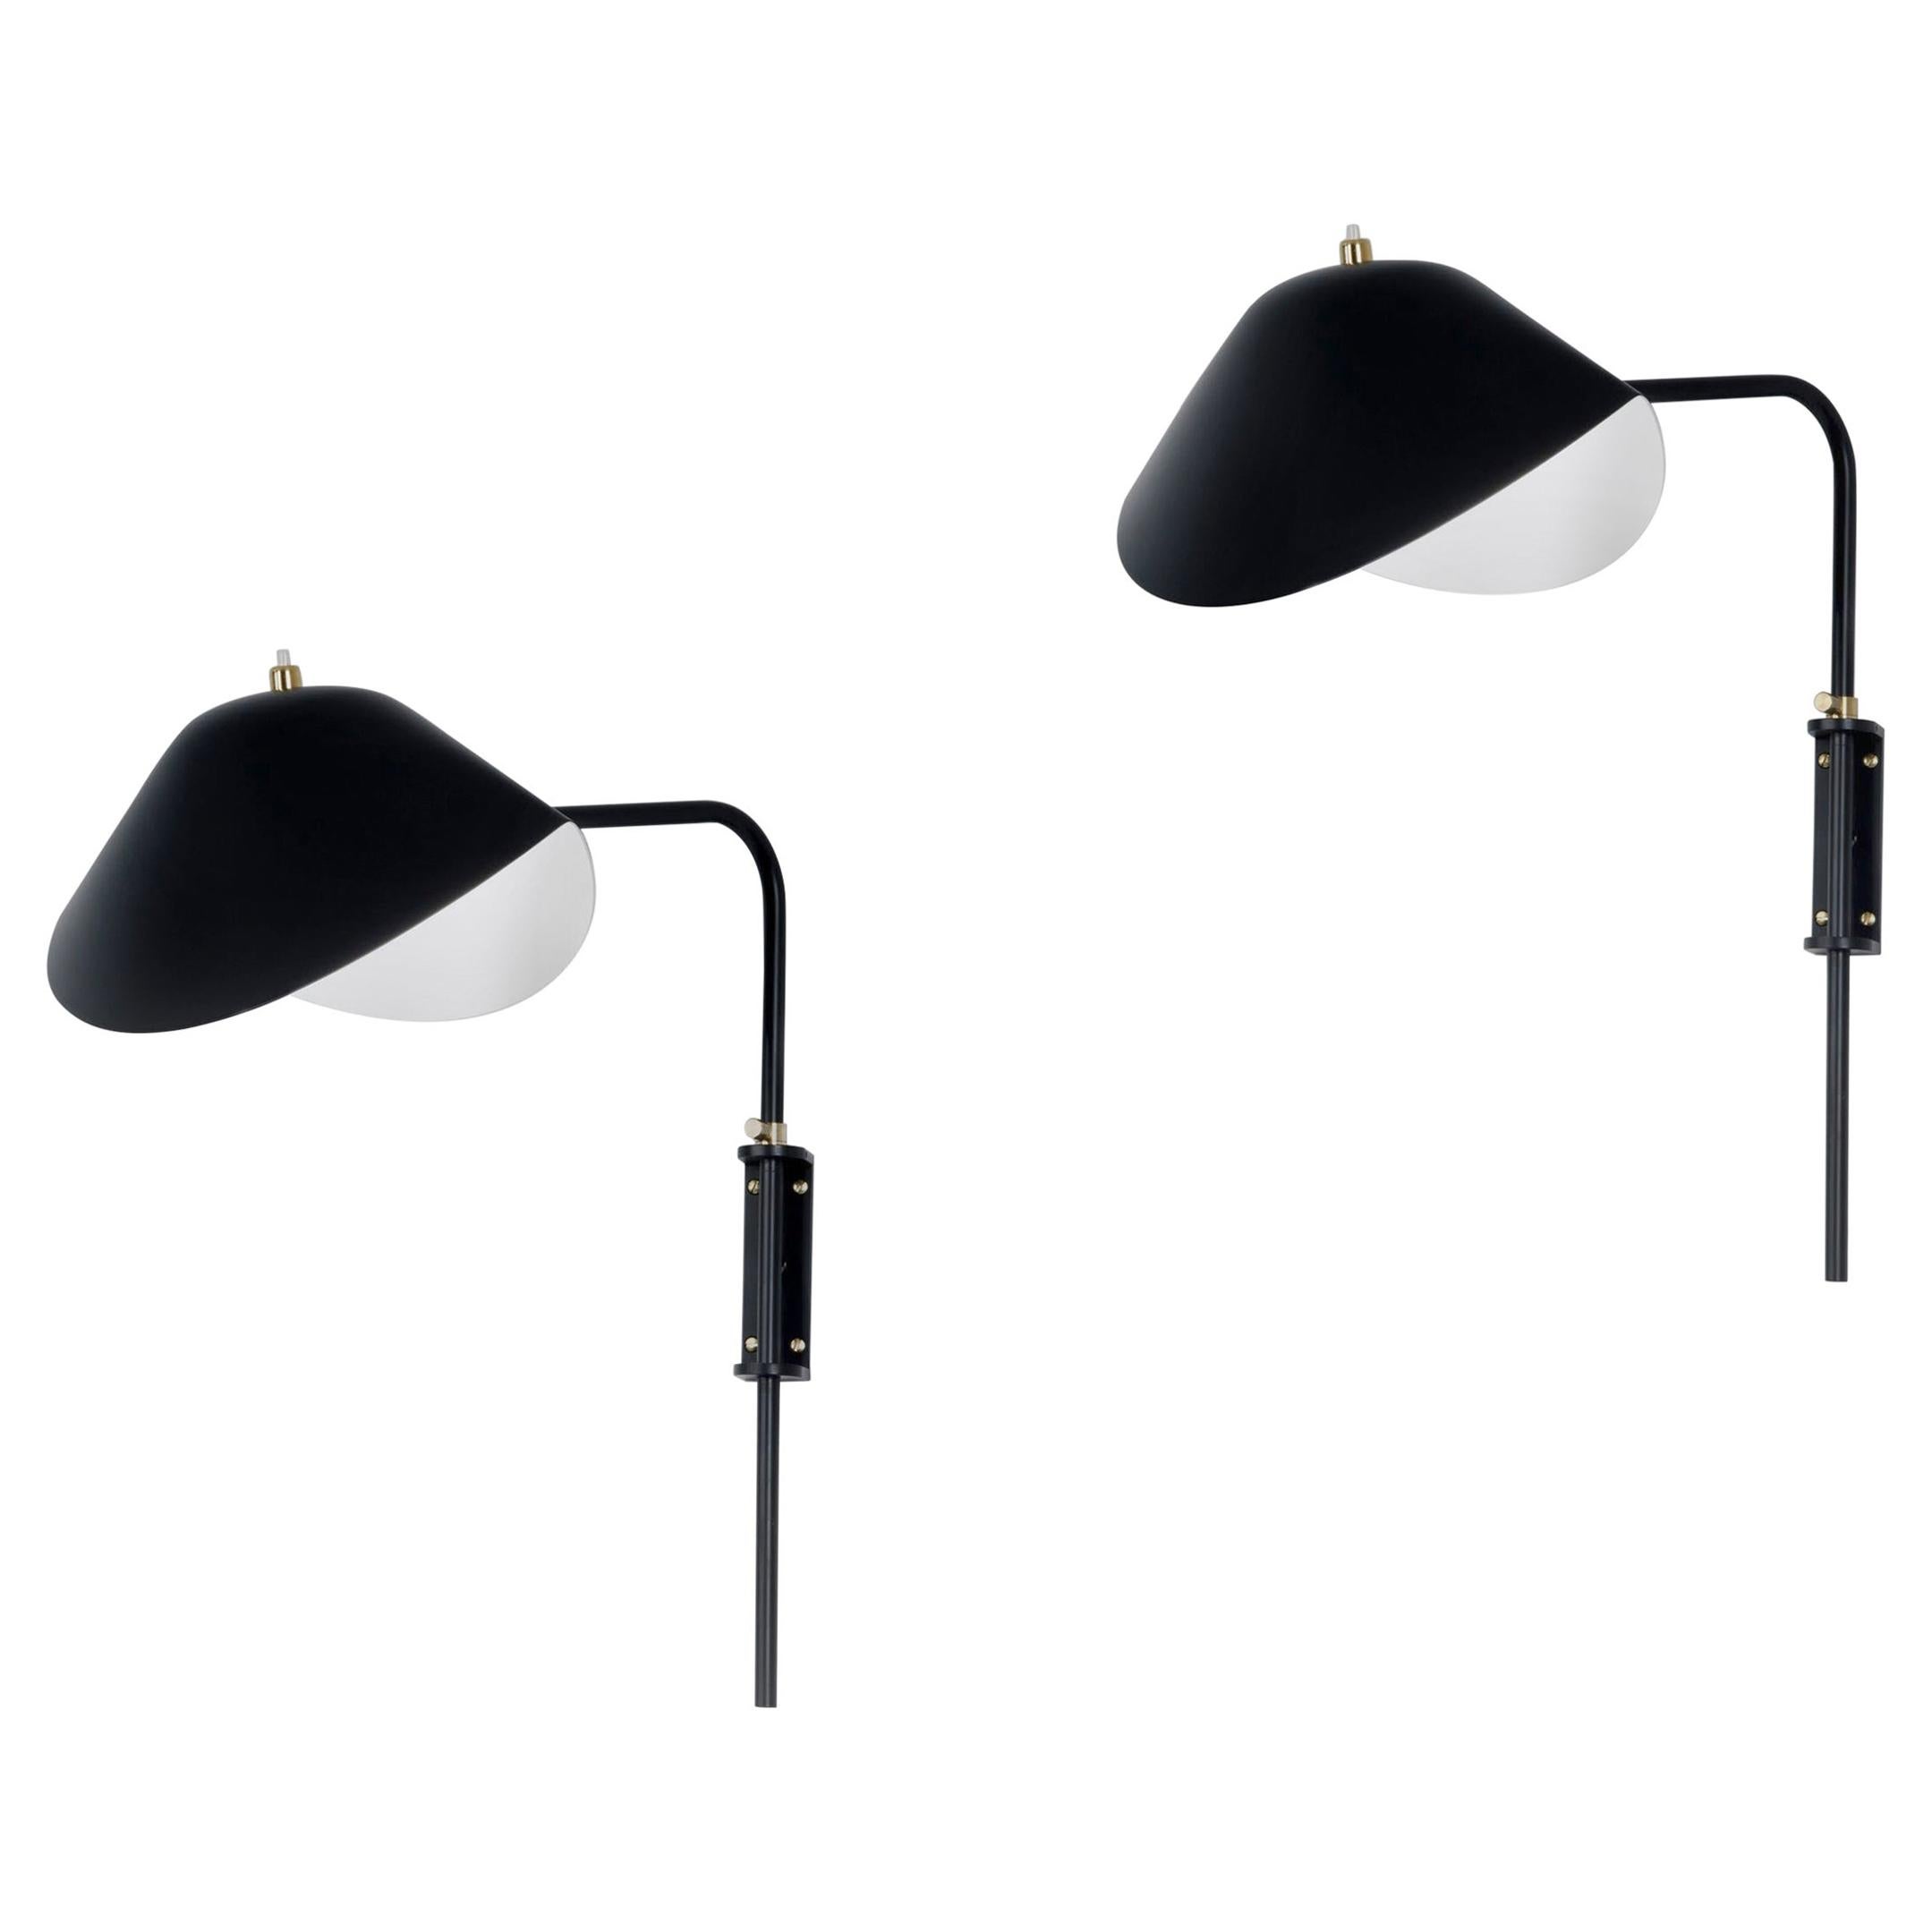 Serge Mouille Mid-Century Modern Black Anthony Wall Lamp Whit Fixing Bracket Set For Sale